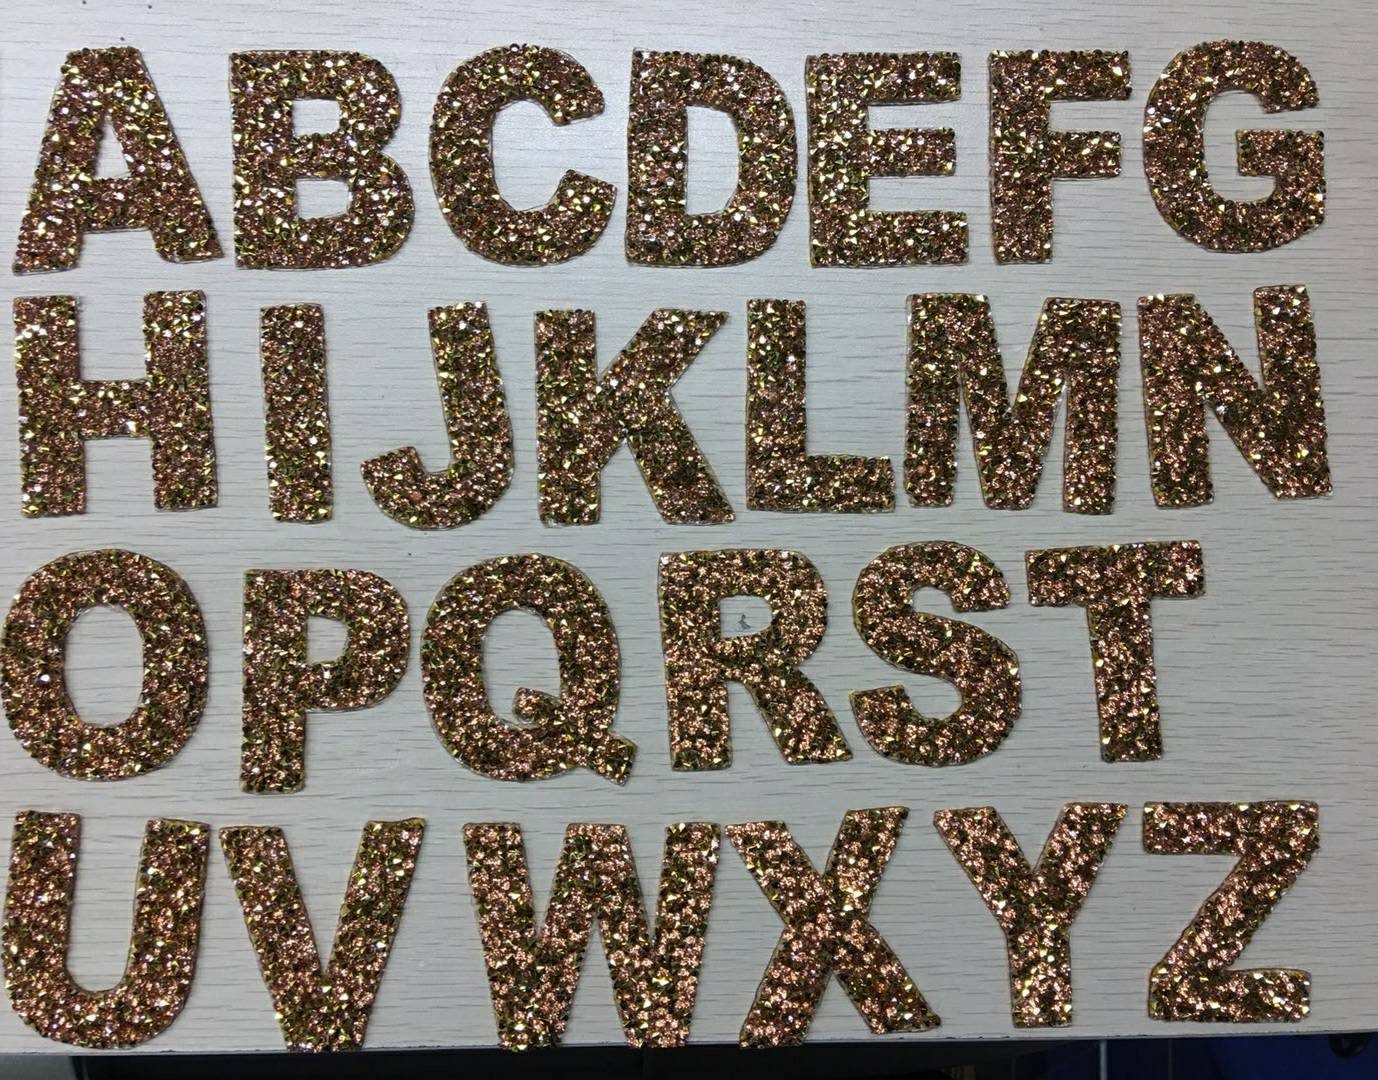 26-pc Set, GOLD Hotfix Rhinestone Letters, Full Alphabet A-Z, Rhinestone  Patch with Adhesive, Mesh Bling Letters, Size 2.28